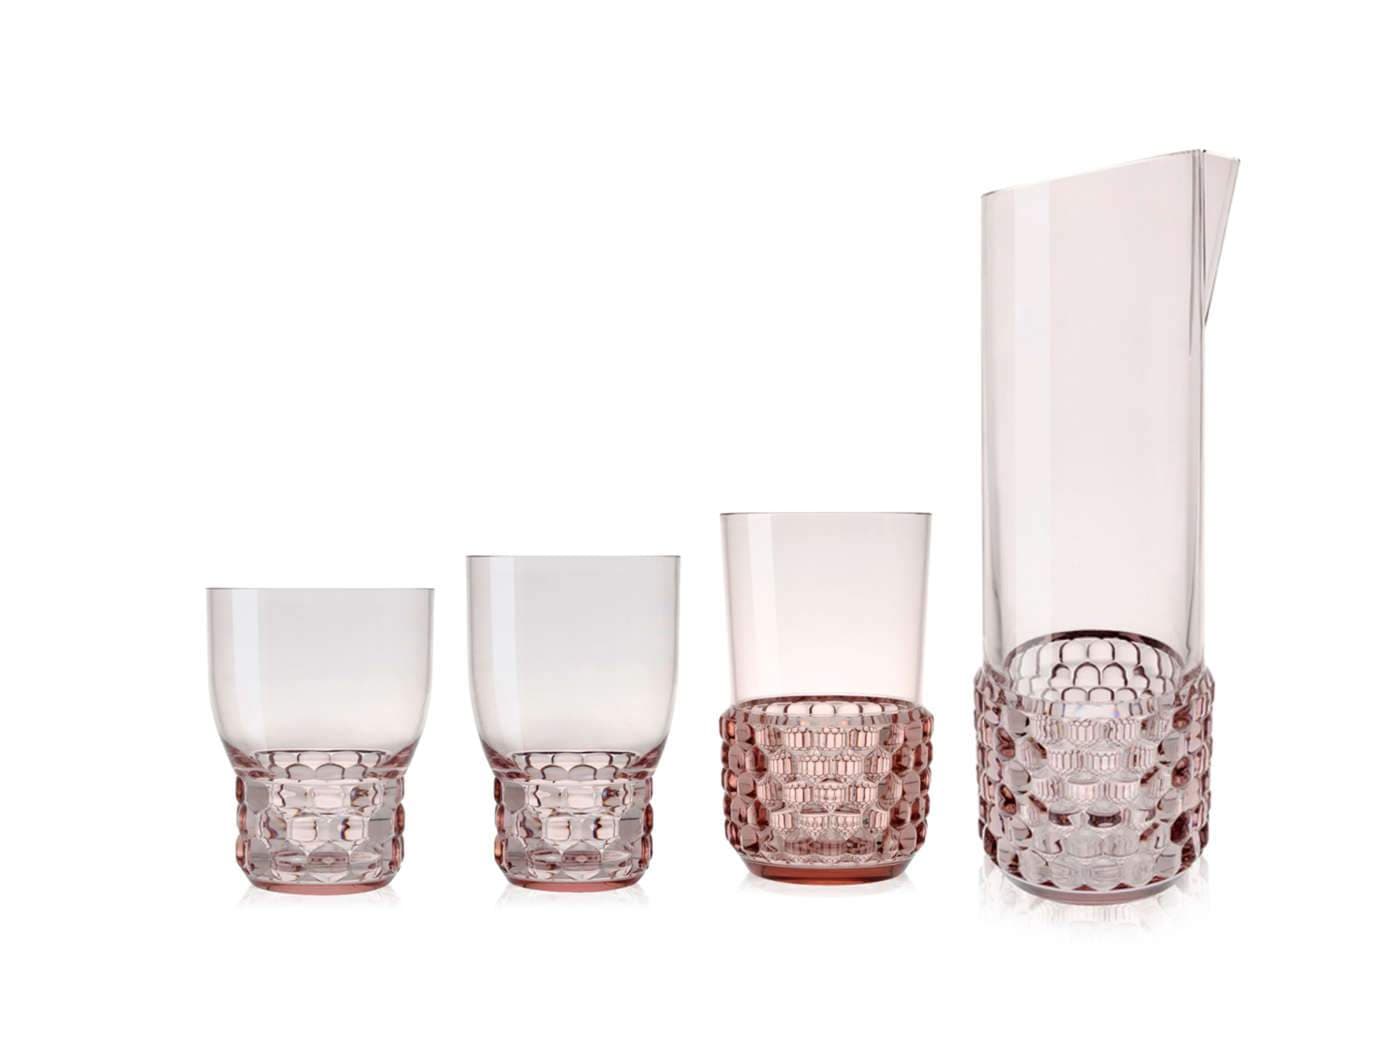 Three cups and one carafe in the pink jellies drinkware range by Kartell.